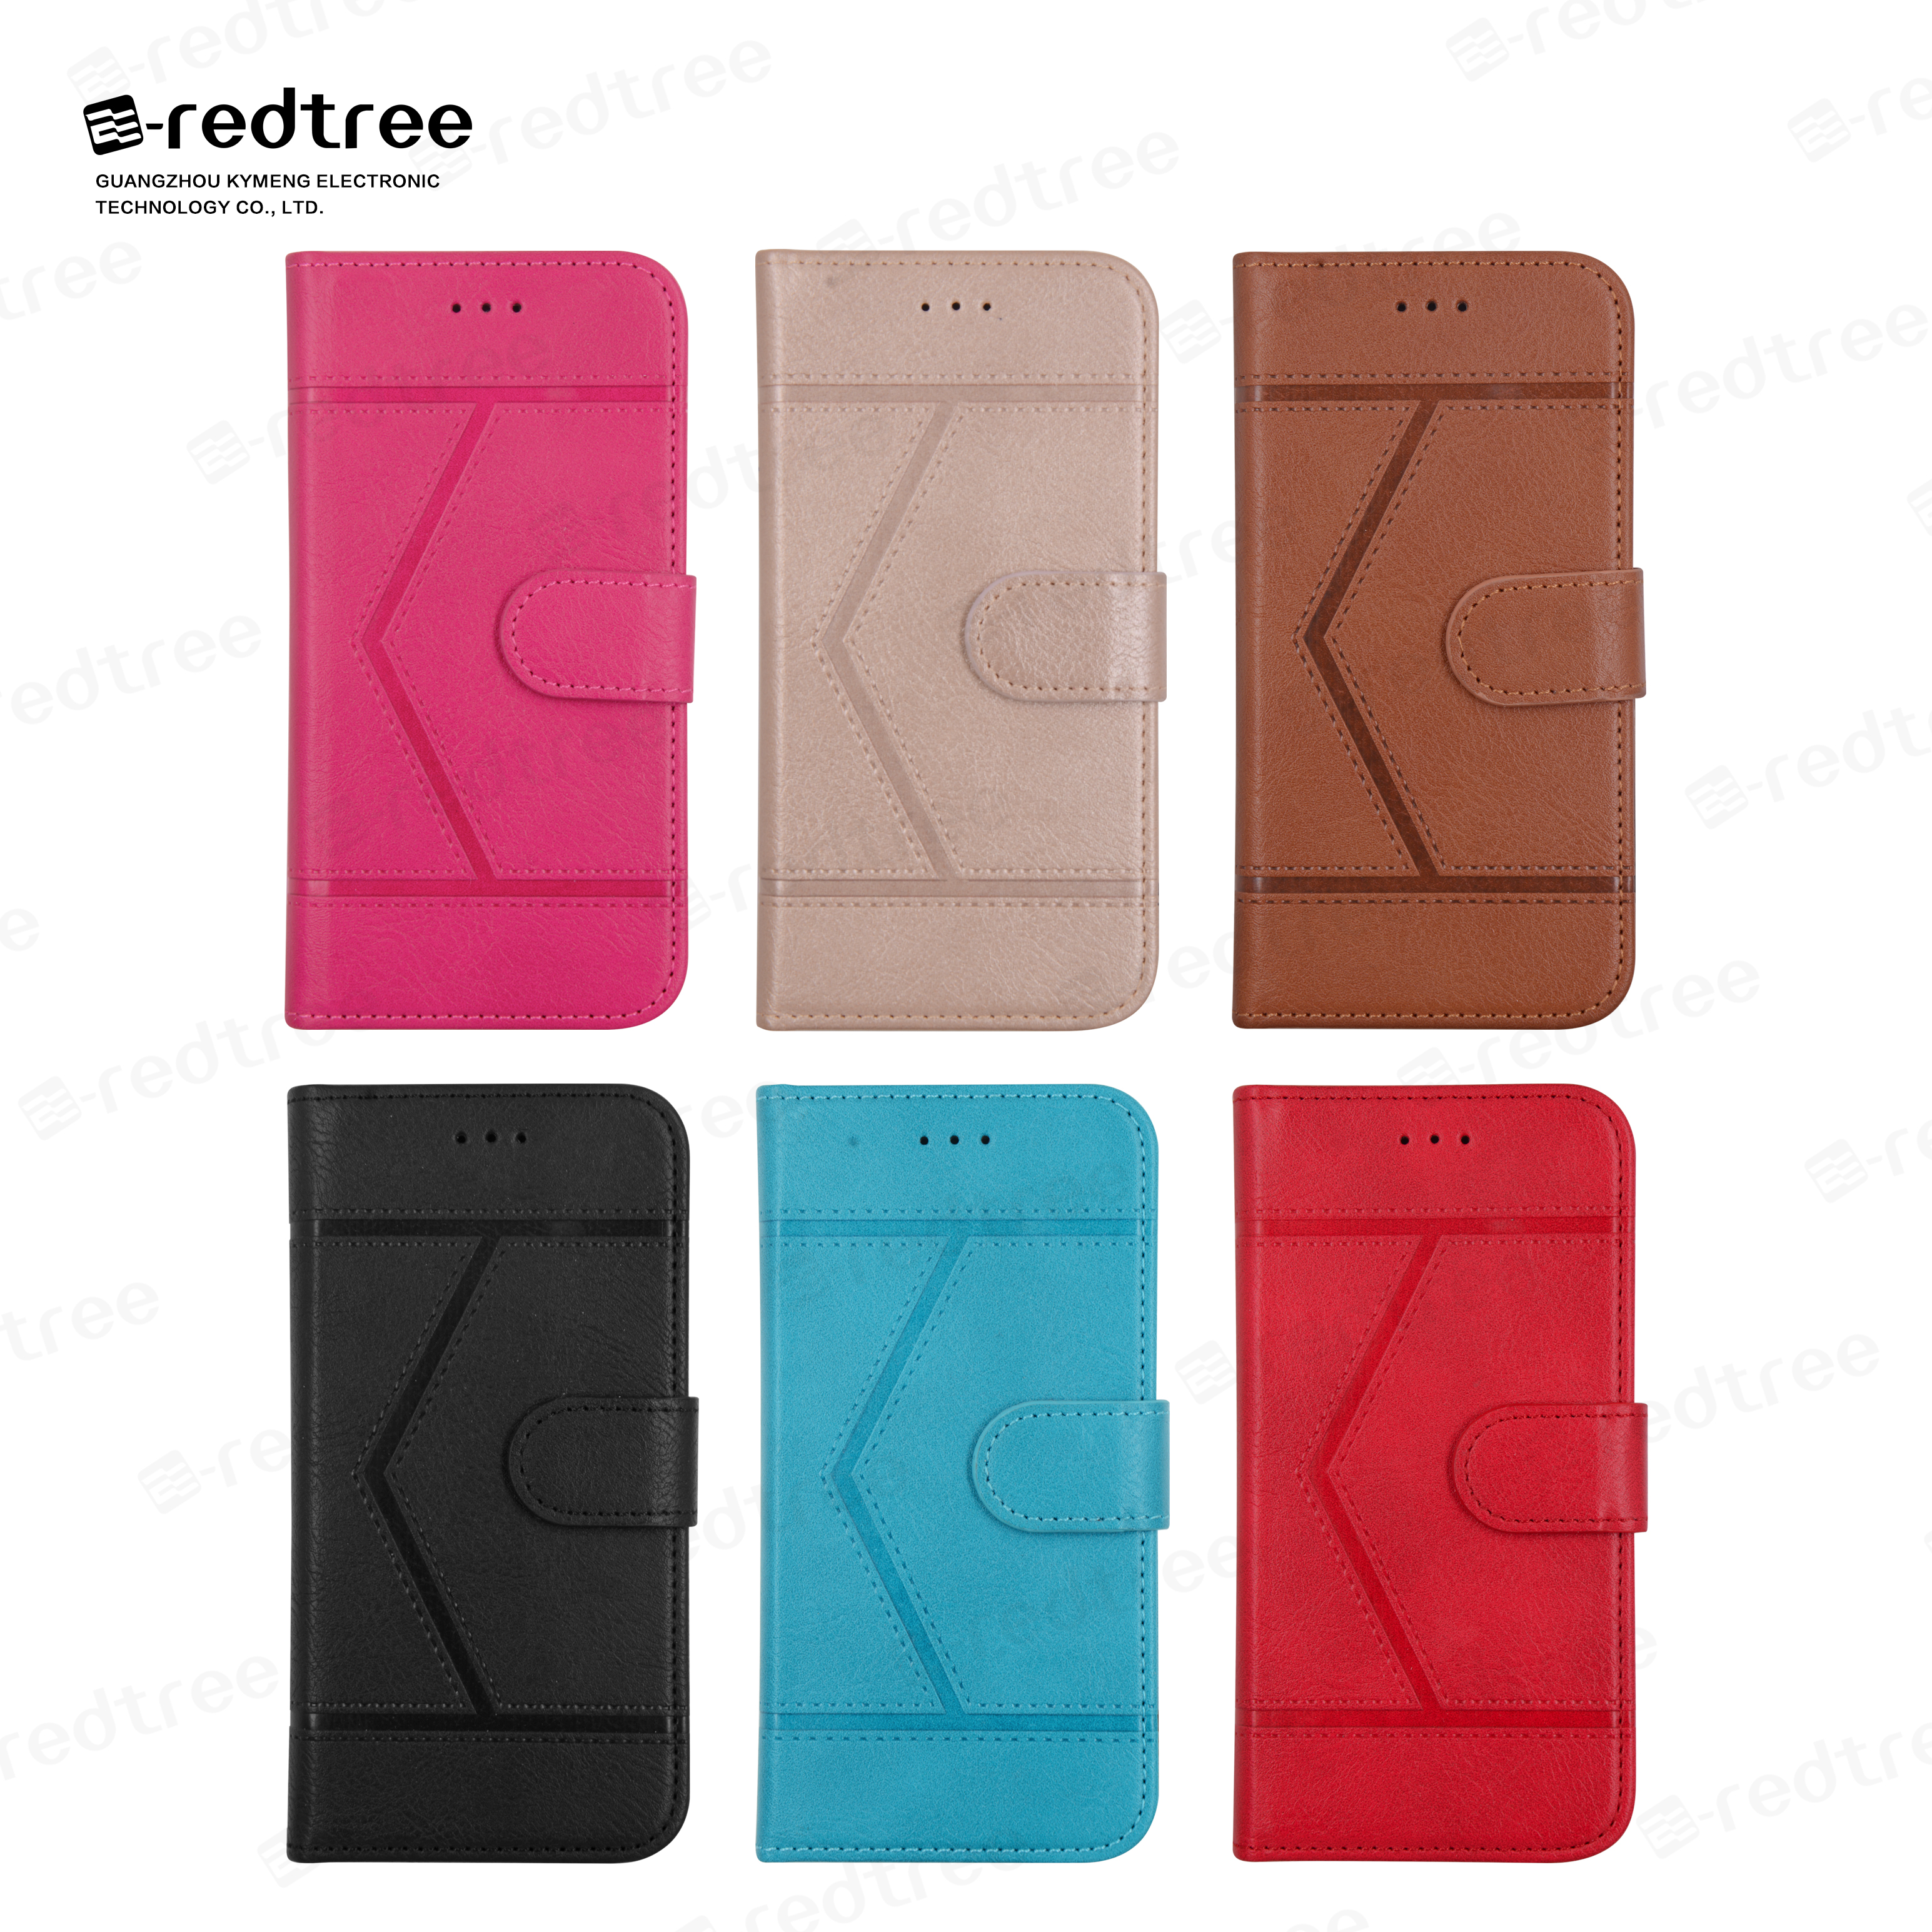 PU leather mobile phone cases